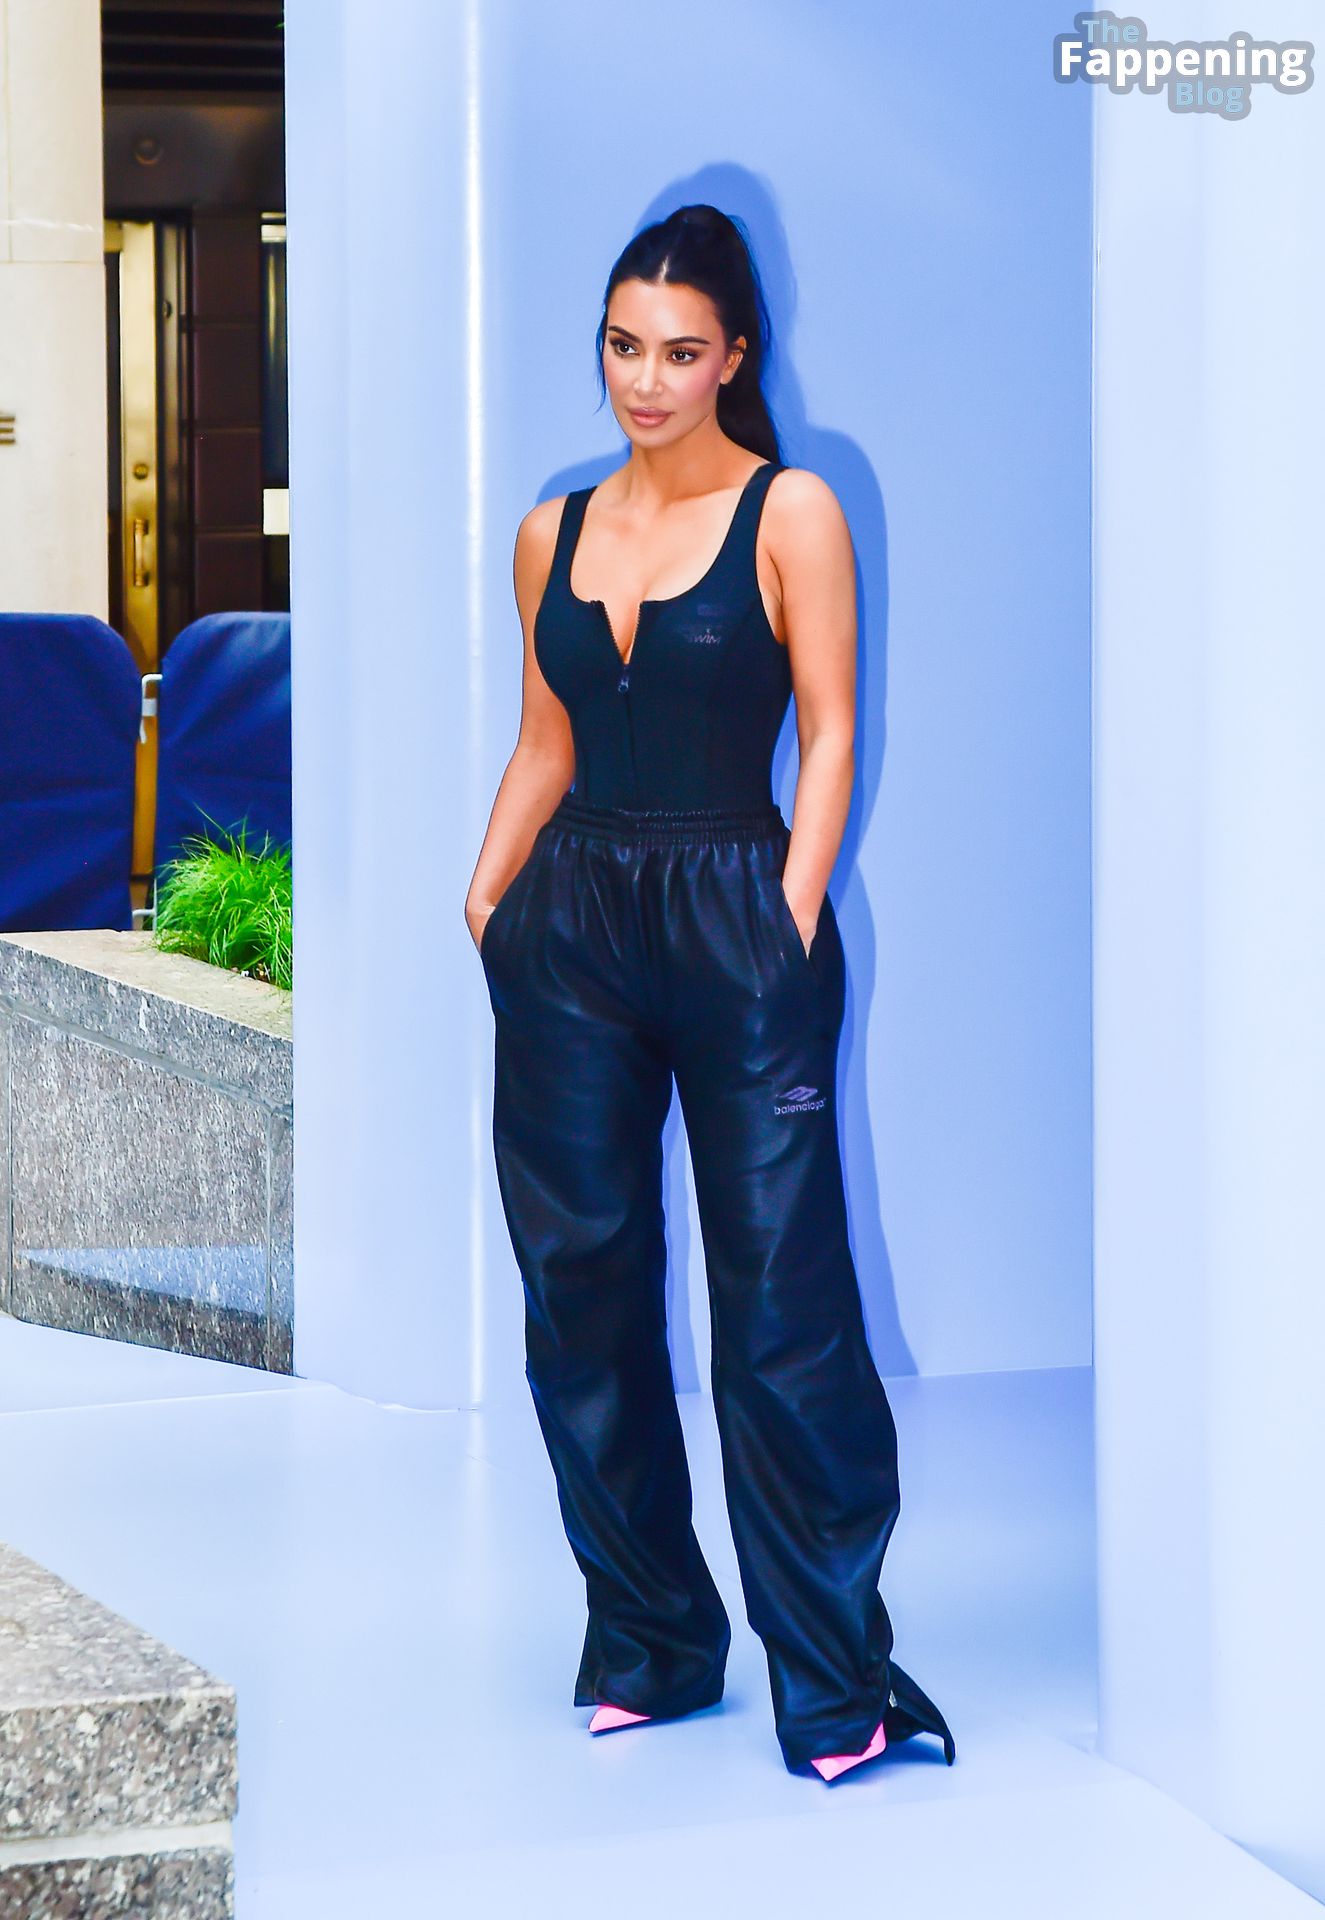 Kim Kardashian is Spotted Filming at Tiffany’s in NYC (131 Photos)